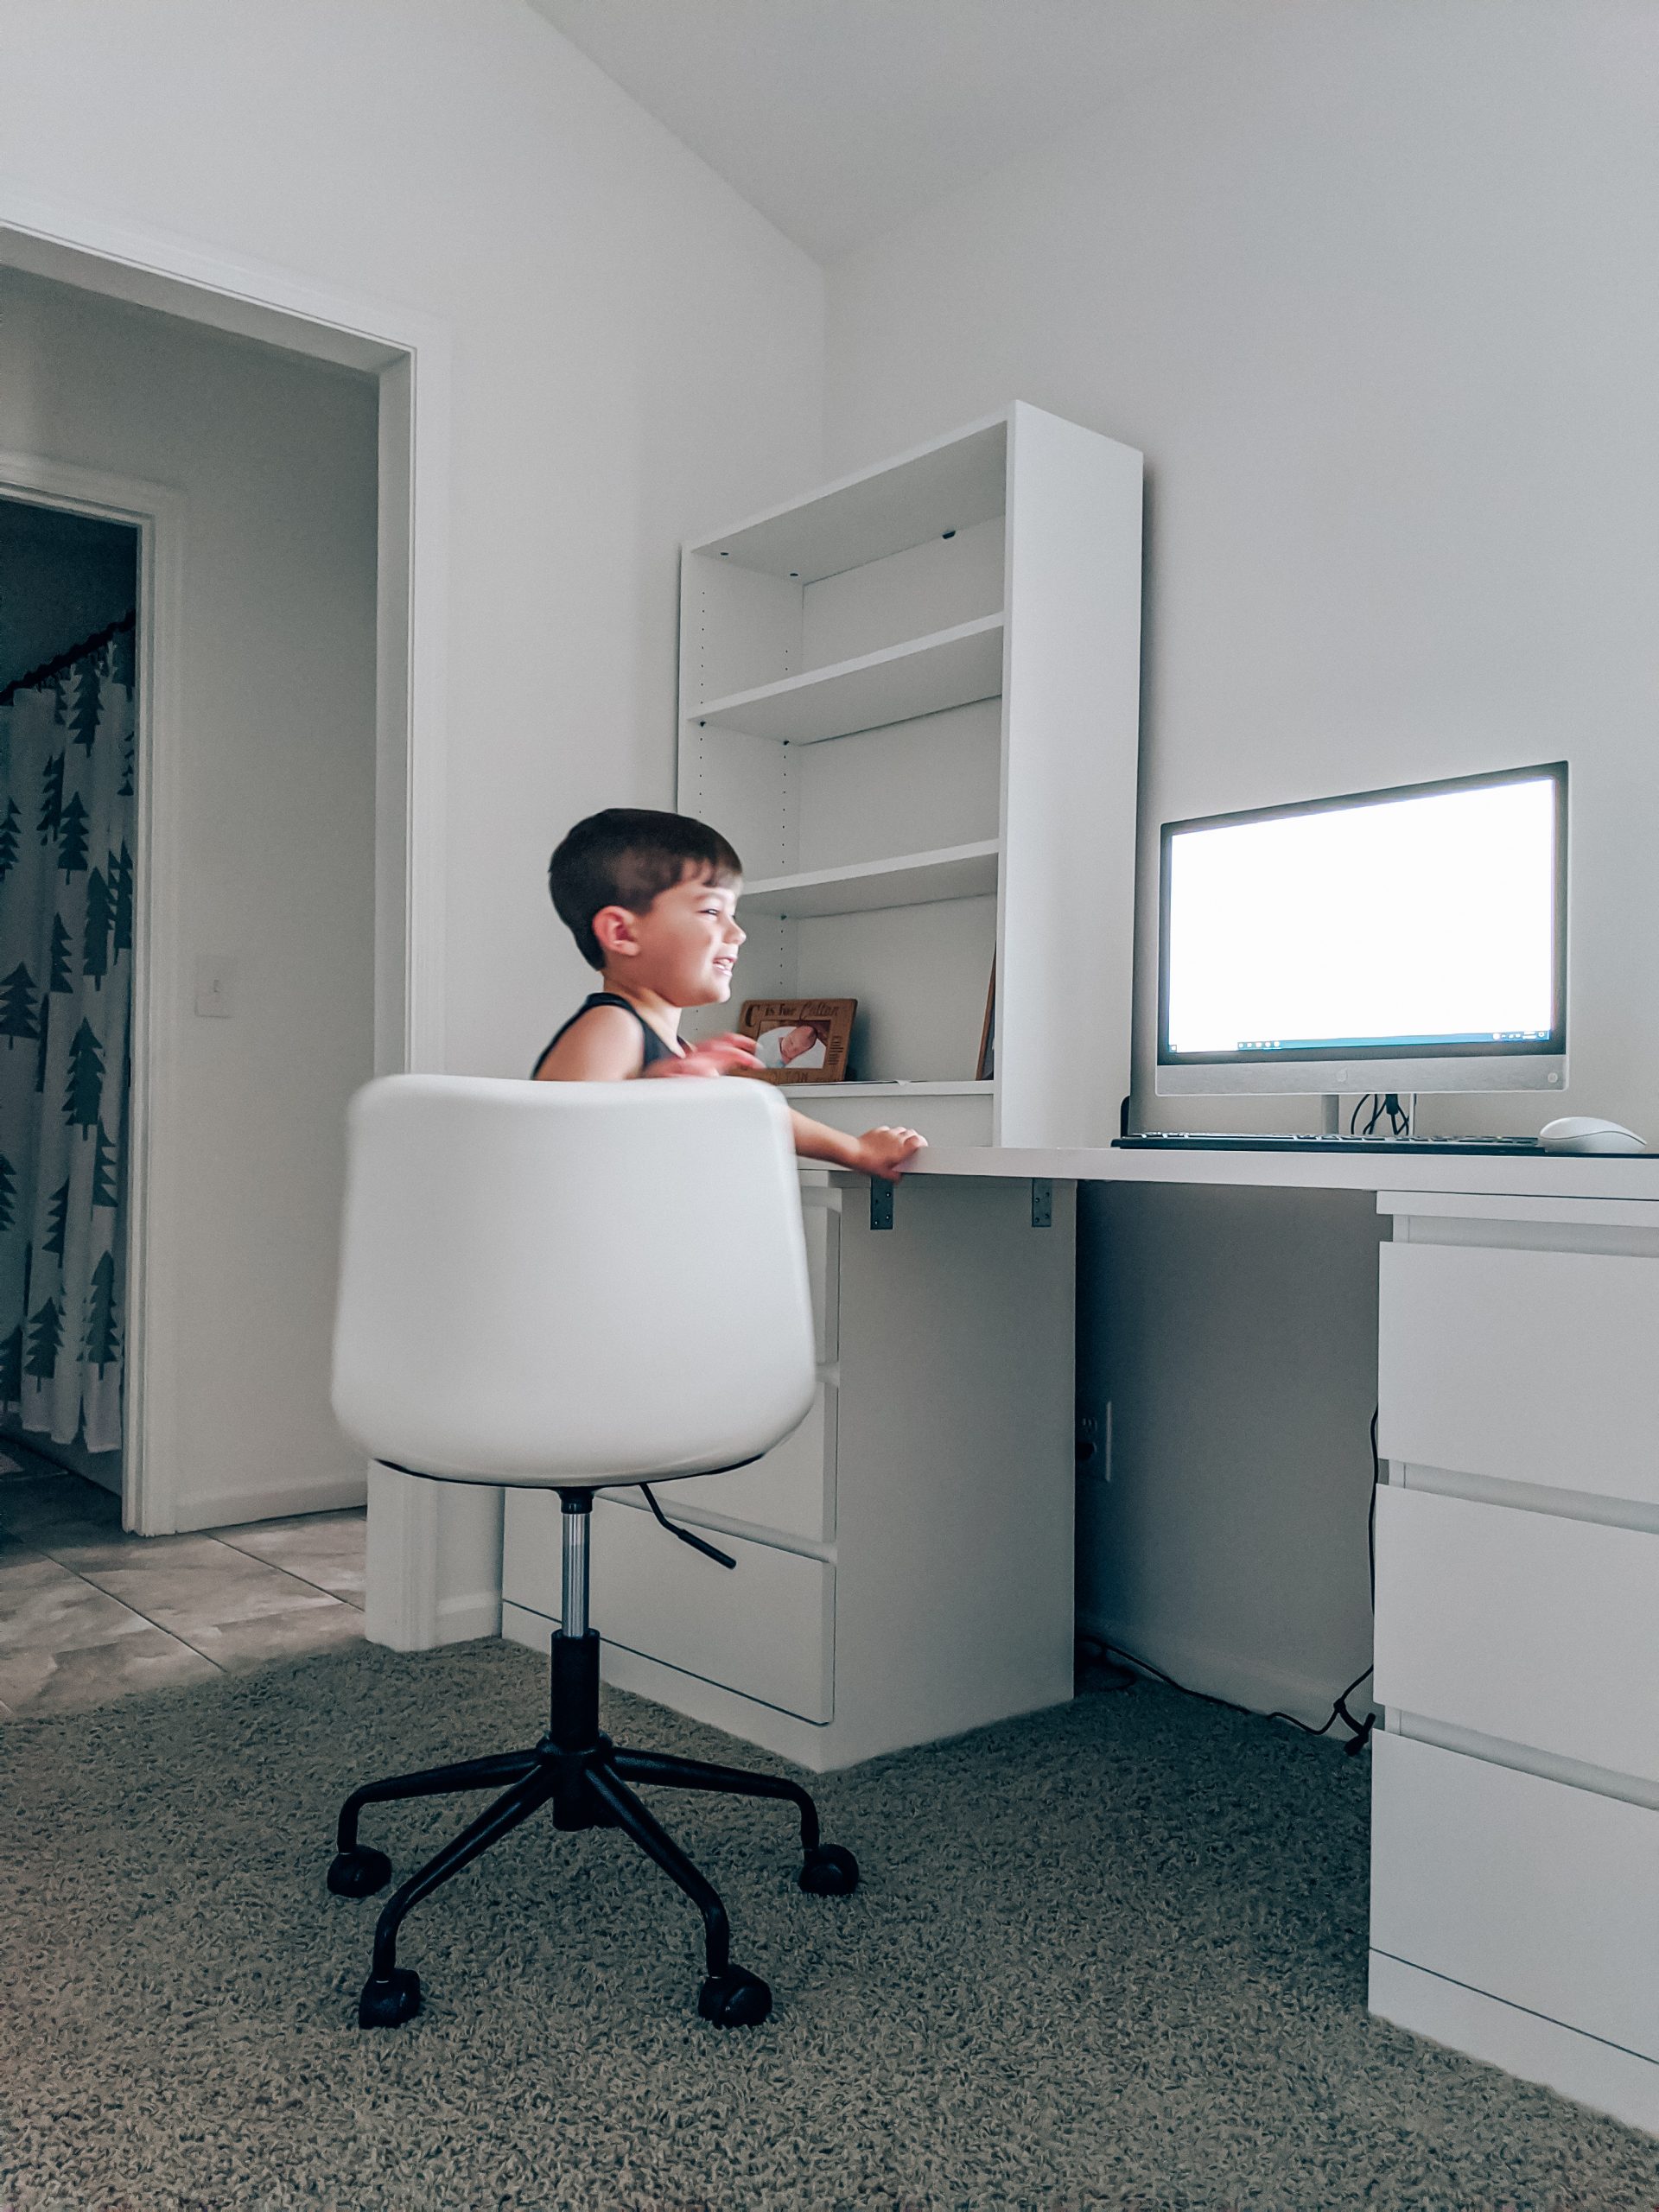 https://www.covetbytricia.com/wp-content/uploads/2020/09/Best-Kids-Desk-Chair-4-scaled.jpg